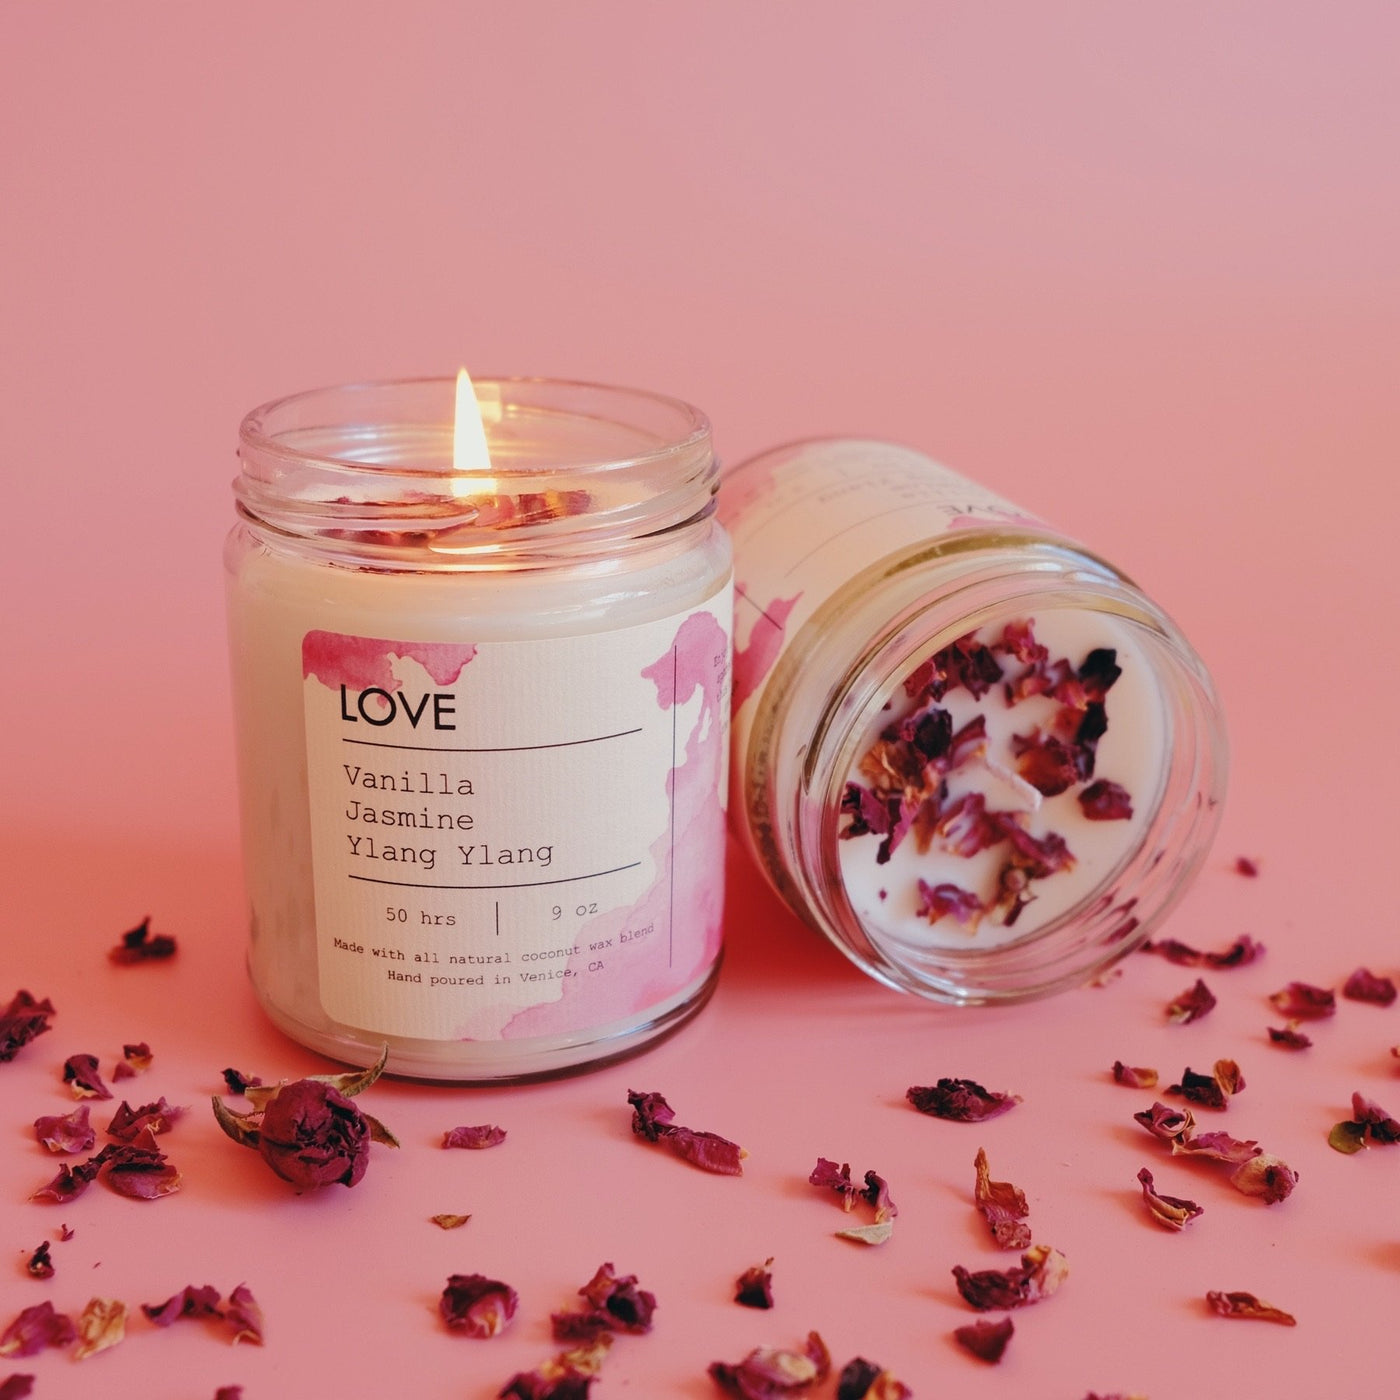 Love Petals Candle - Roses & Chains | Fashionable Clothing, Shoes, Accessories, & More